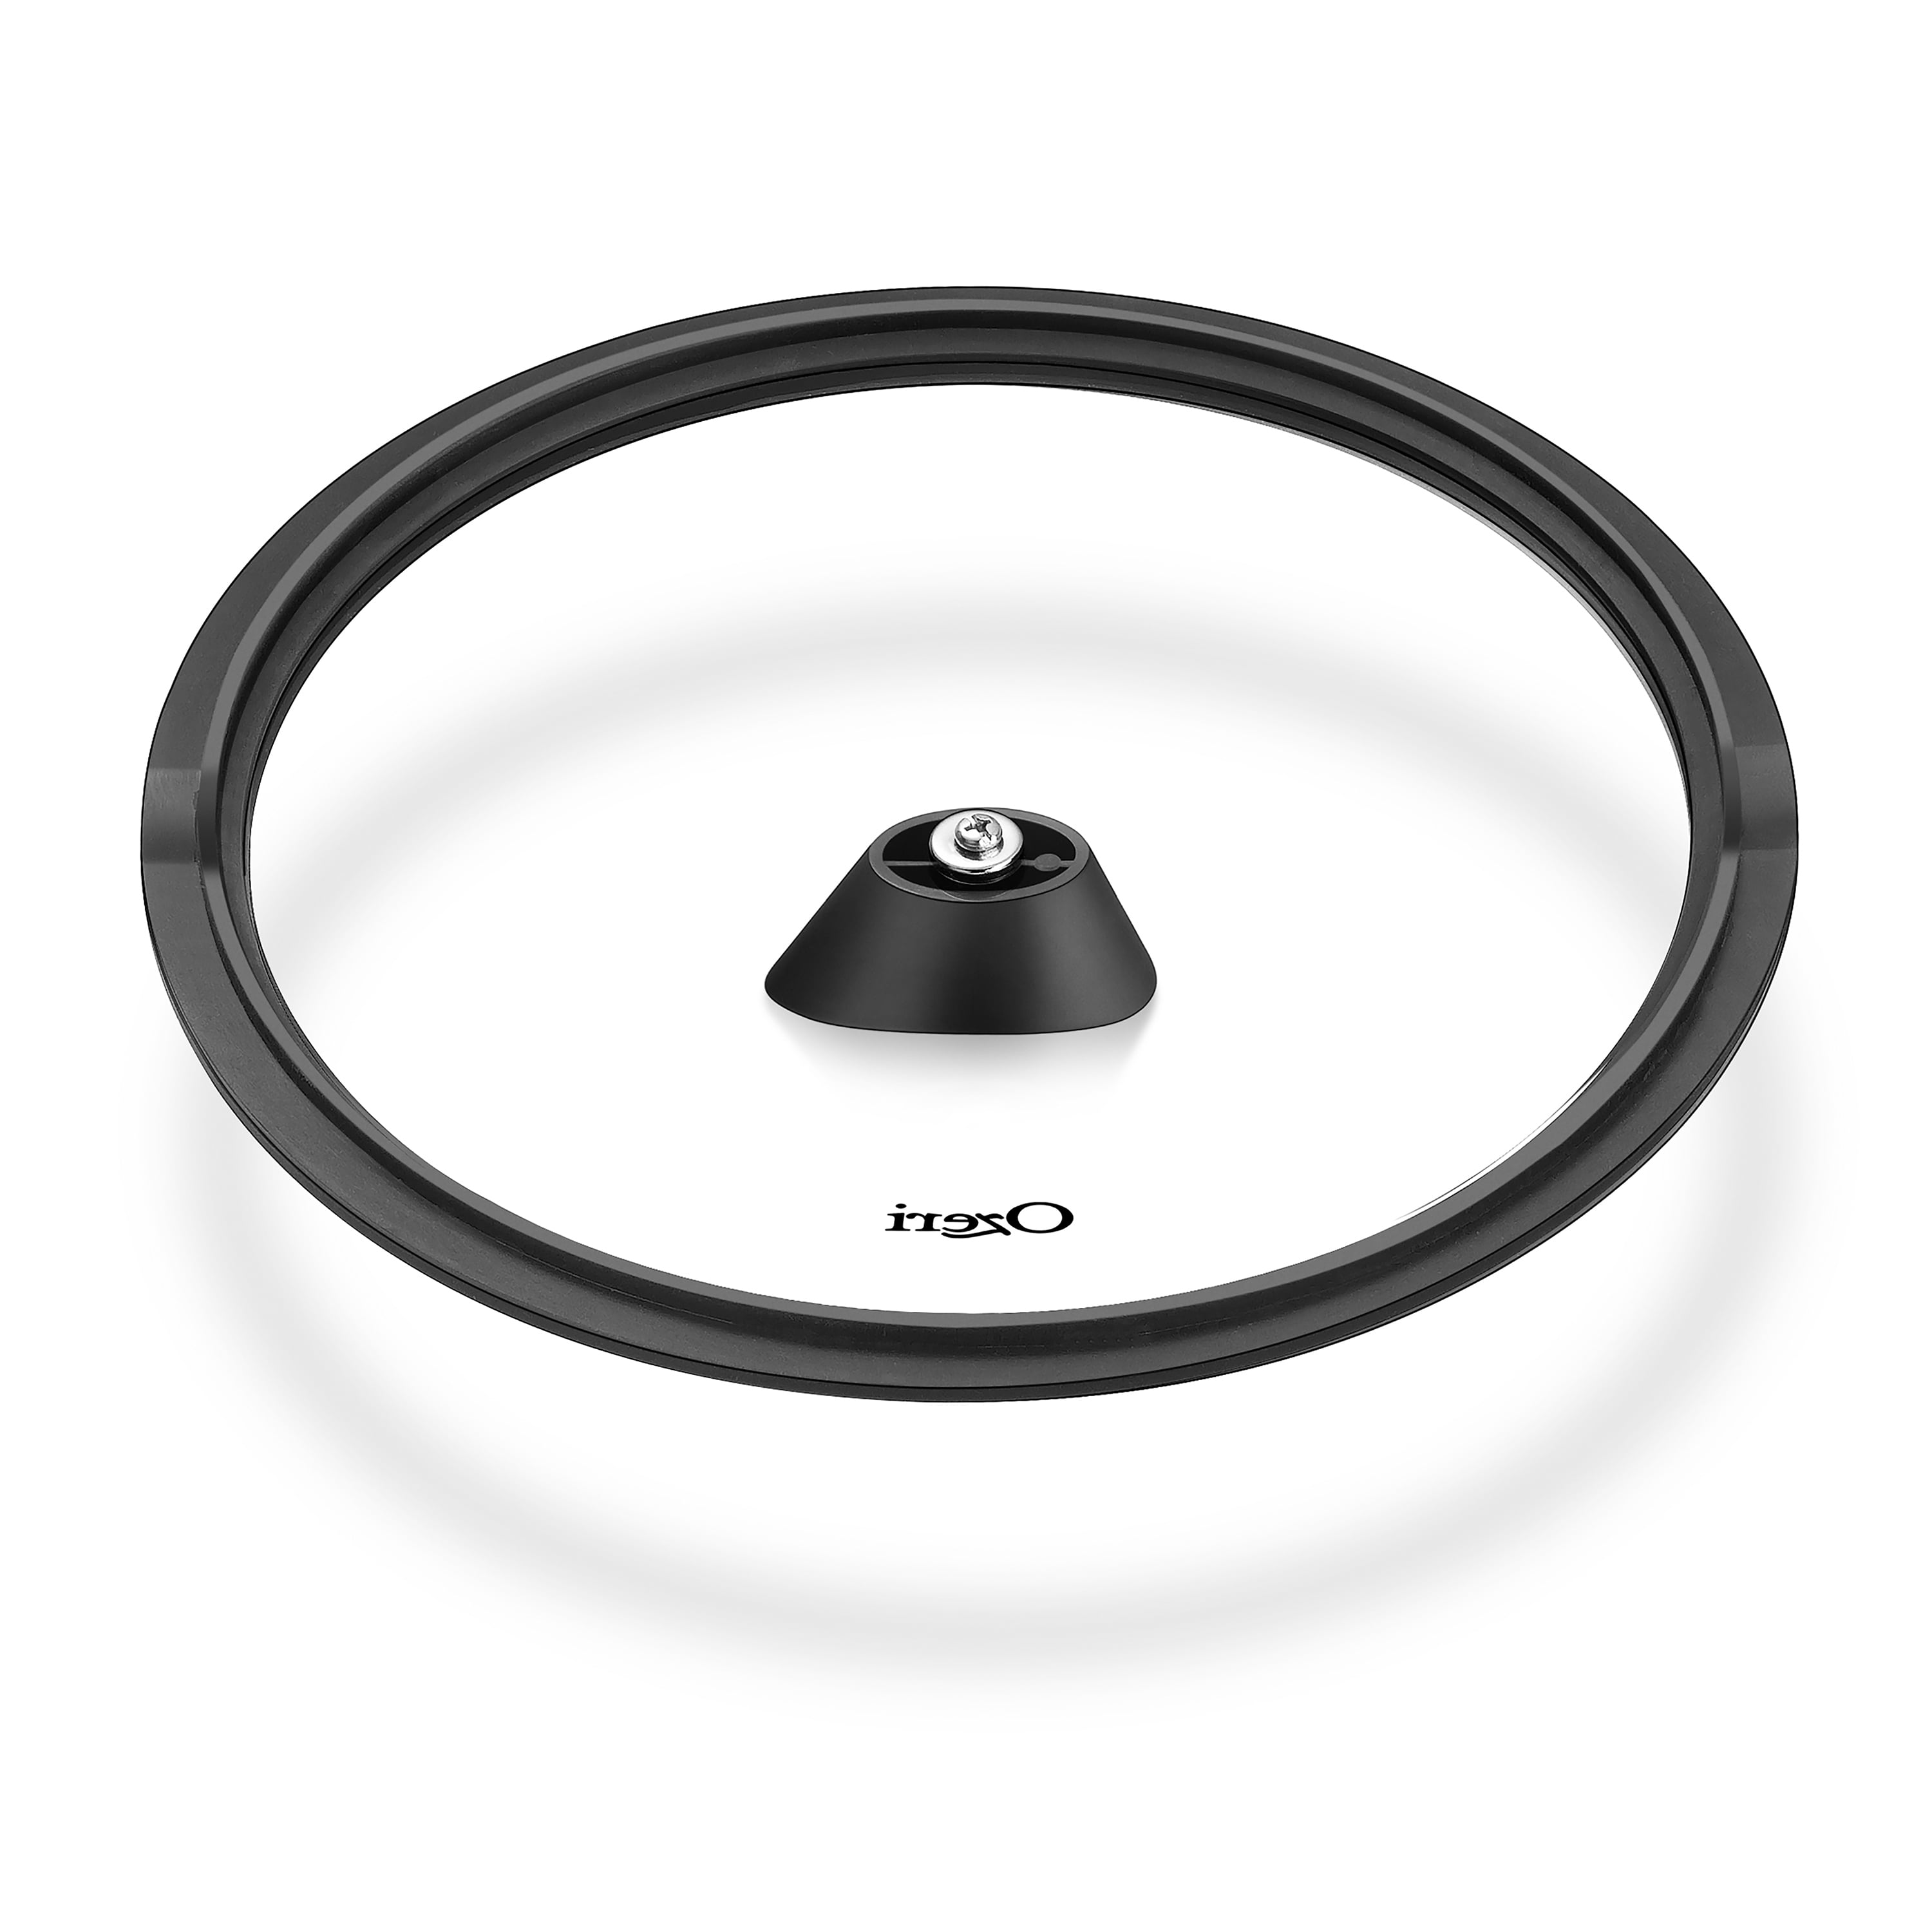 8 Frying Pan Lid in Tempered Glass, by Ozeri